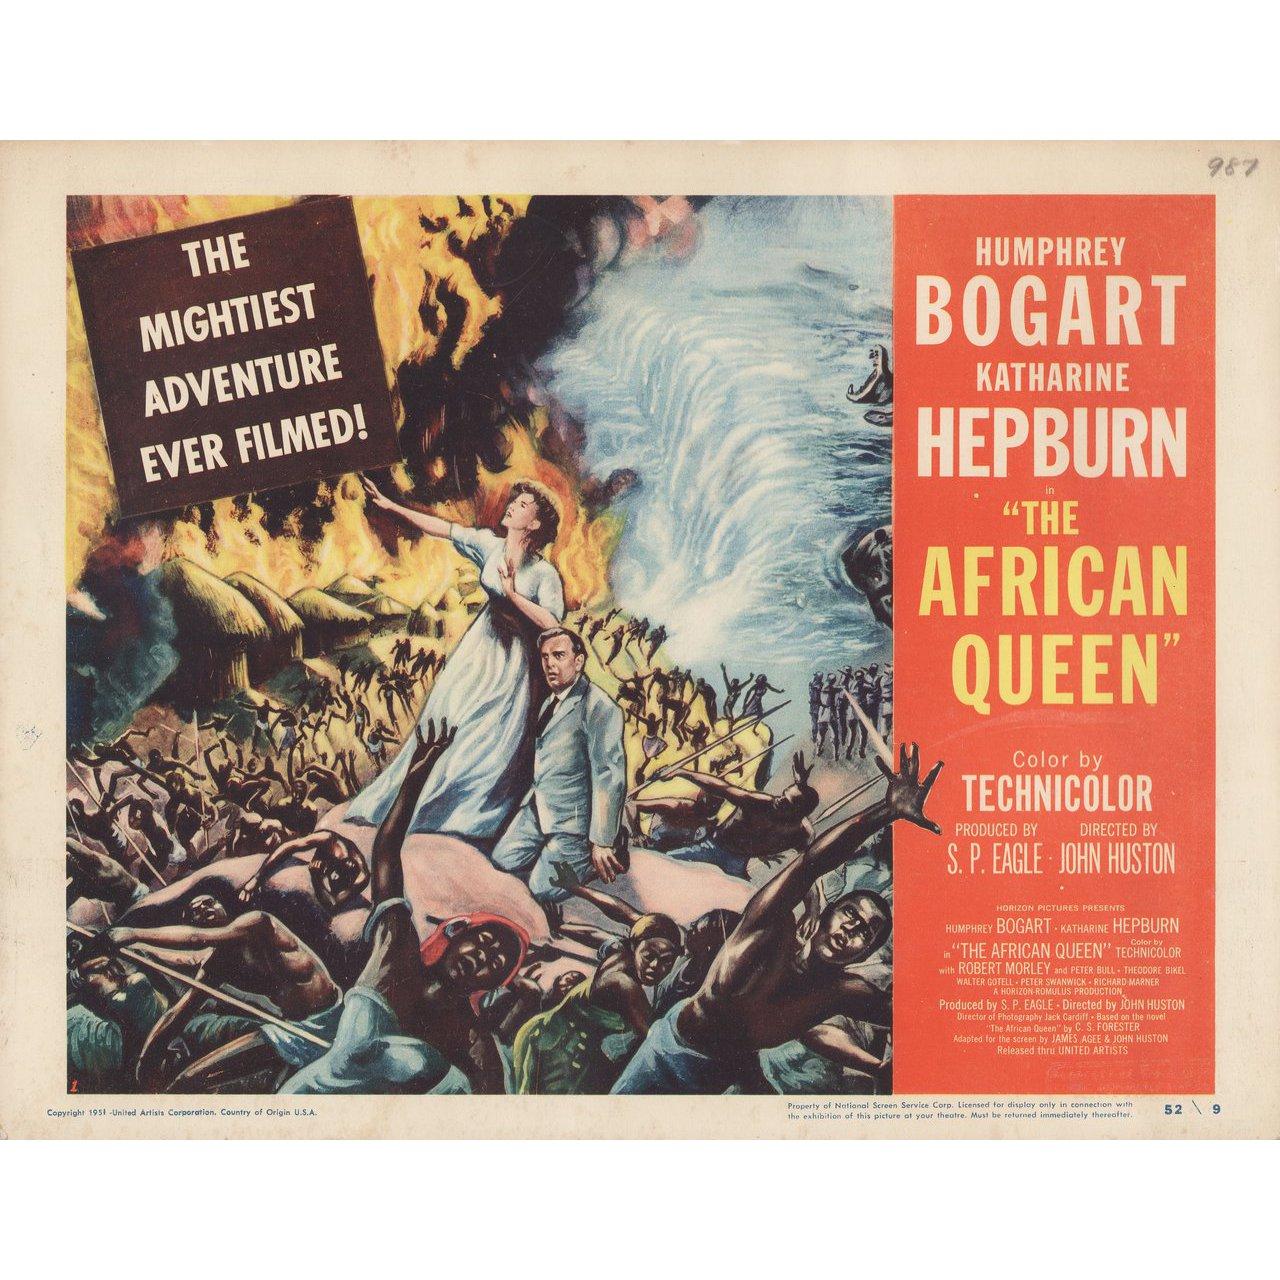 Original 1952 U.S. title card for the film The African Queen directed by John Huston with Humphrey Bogart / Katharine Hepburn / Robert Morley / Peter Bull. Fine condition. Please note: the size is stated in inches and the actual size can vary by an